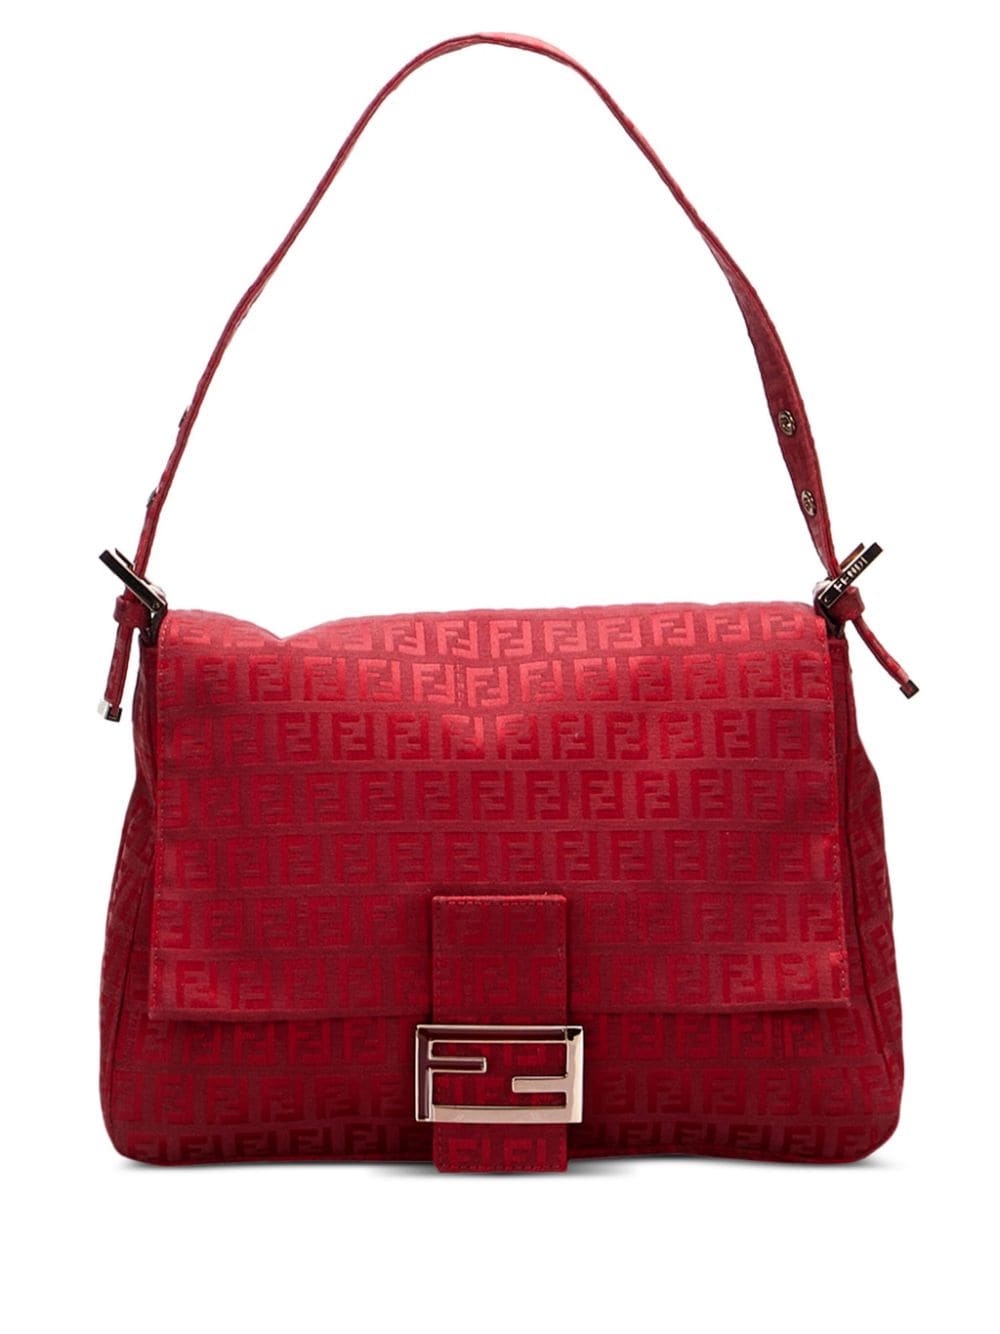 BEST HANDBAGS that are actually worth the $ - IG @savinachow #bagtikt, fendi baguette phone pouch